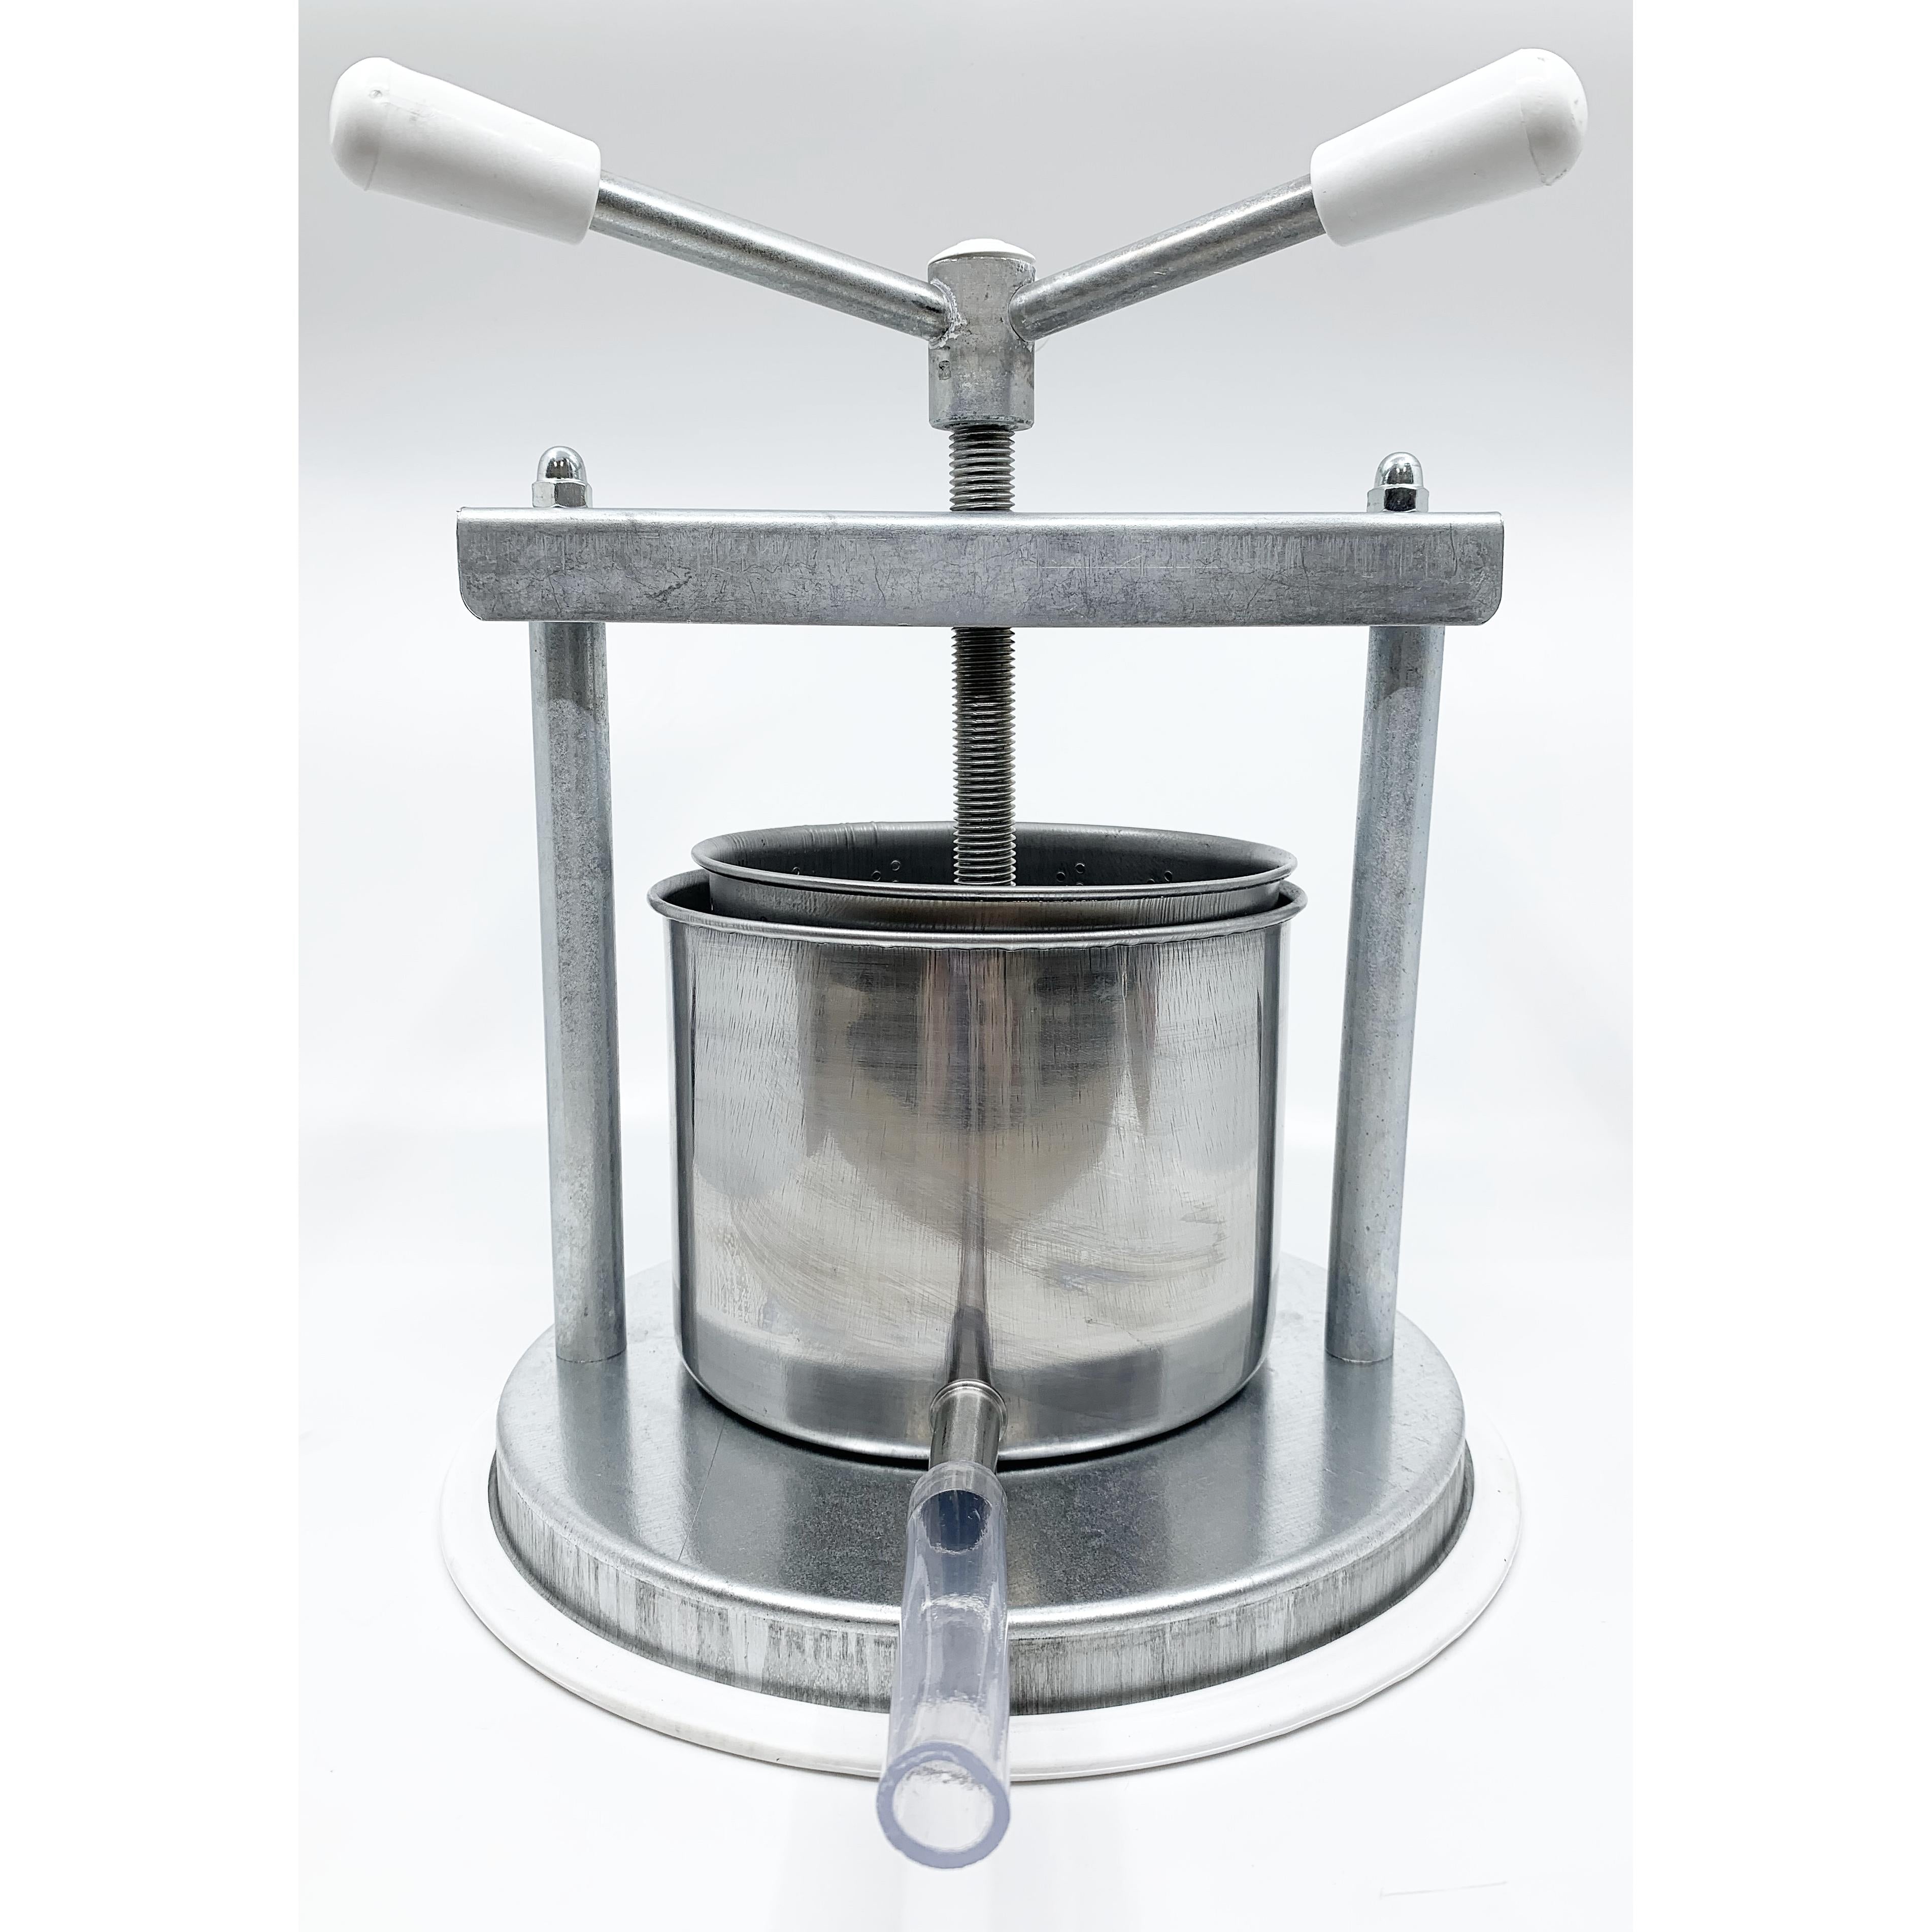 Medium Professional Galvanized Vegetable / Fruit Press 6" - 2.5 Litre Torchietto - Made in Italy for Pressing Fruits, Vegetables, Berries and Tinctures with Spout USA